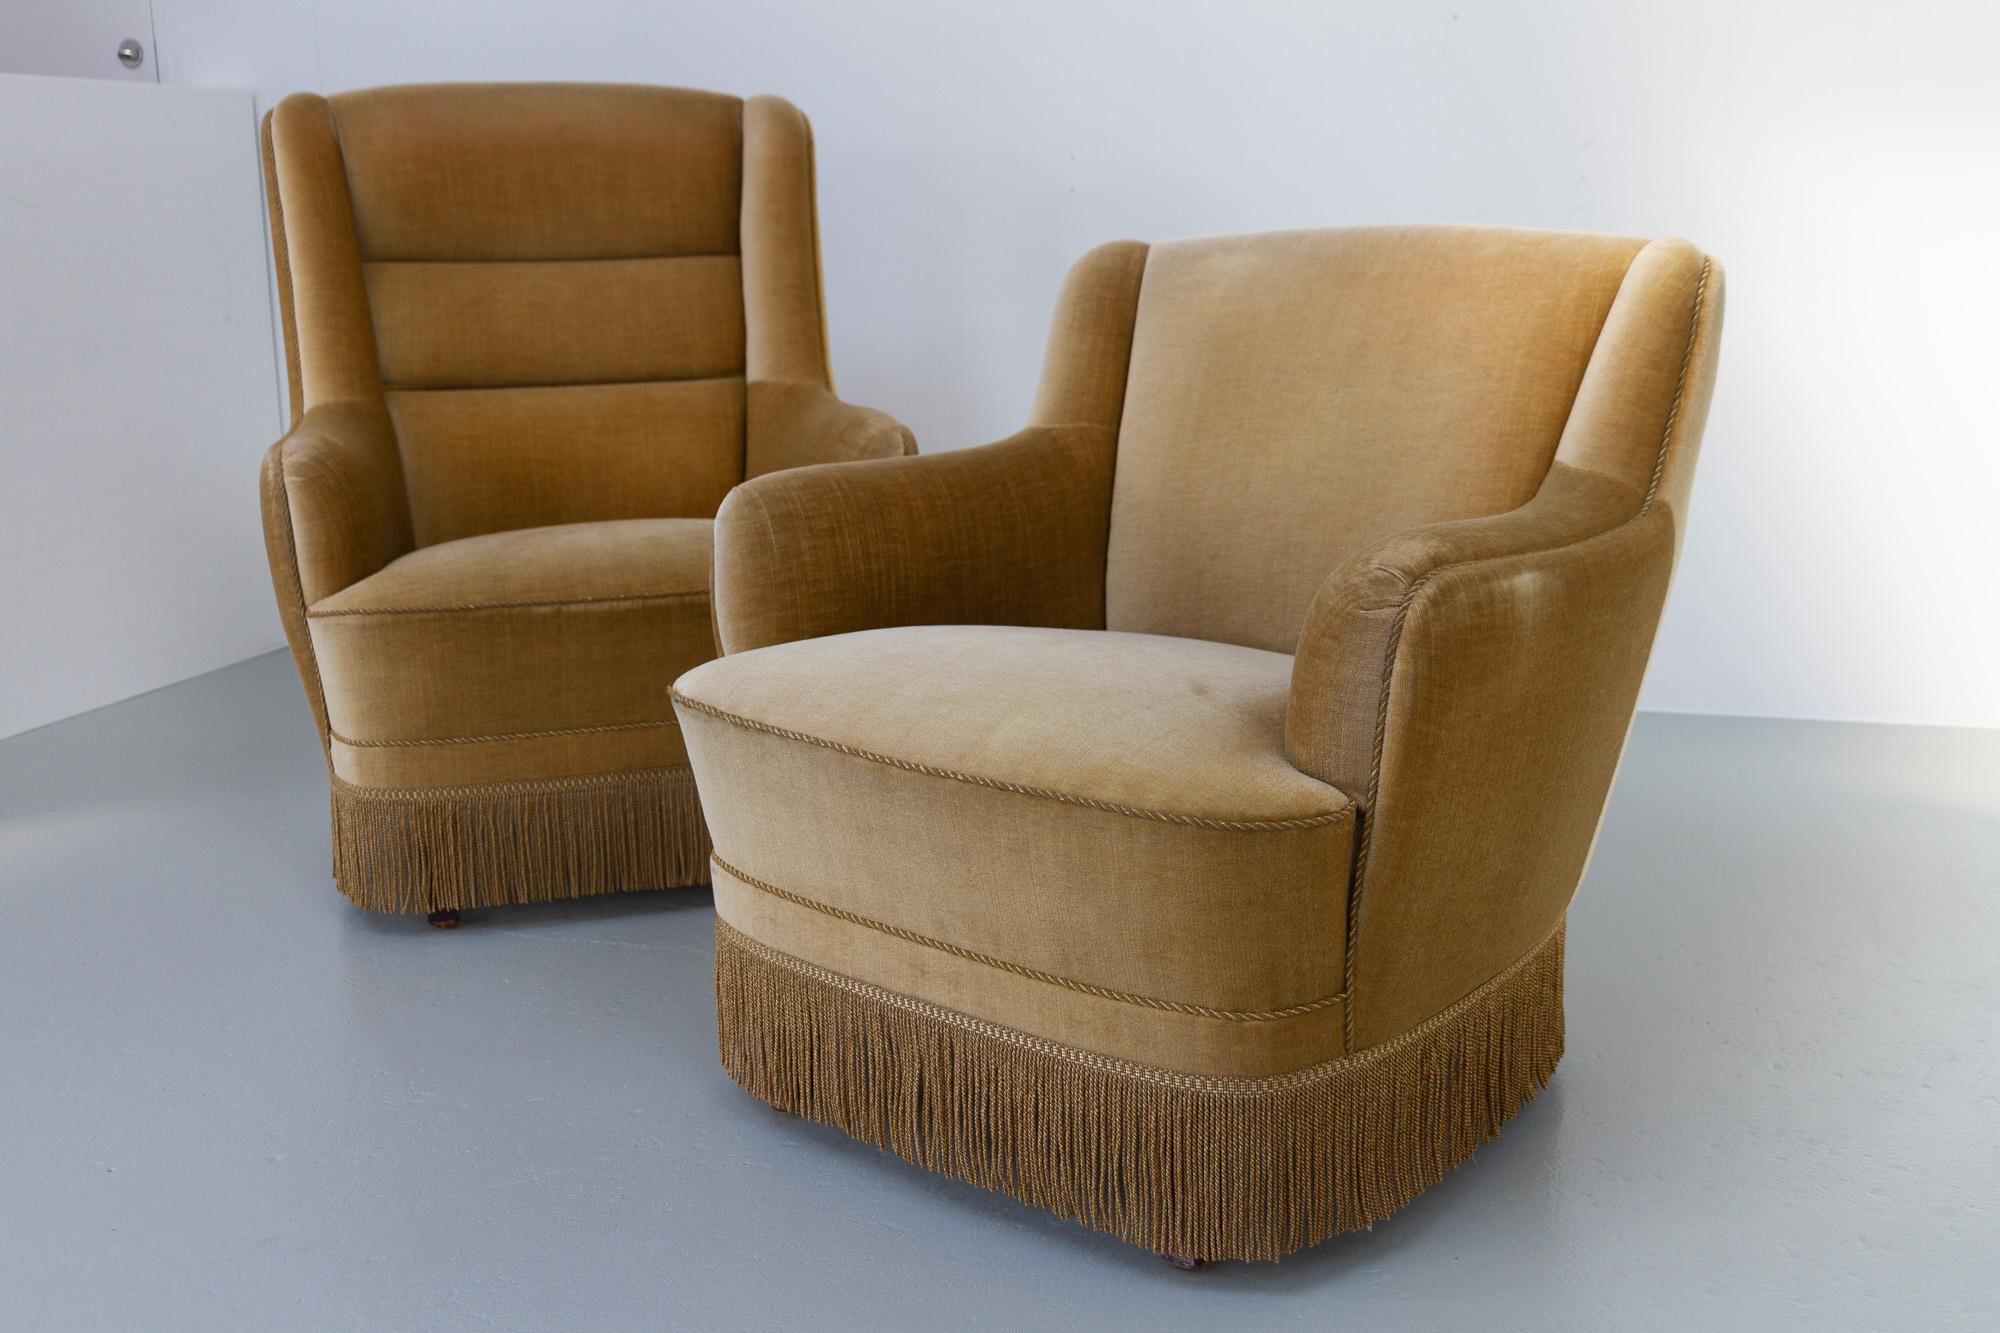 Vintage Danish Velvet Lounge Chairs, 1940s. Set of 2.
Pair of vintage Art Deco curved arm chairs upholstered in golden yellow velvet made by Danish cabinetmaker in the 1940s. Matching high back and low back chairs with original spring and velour